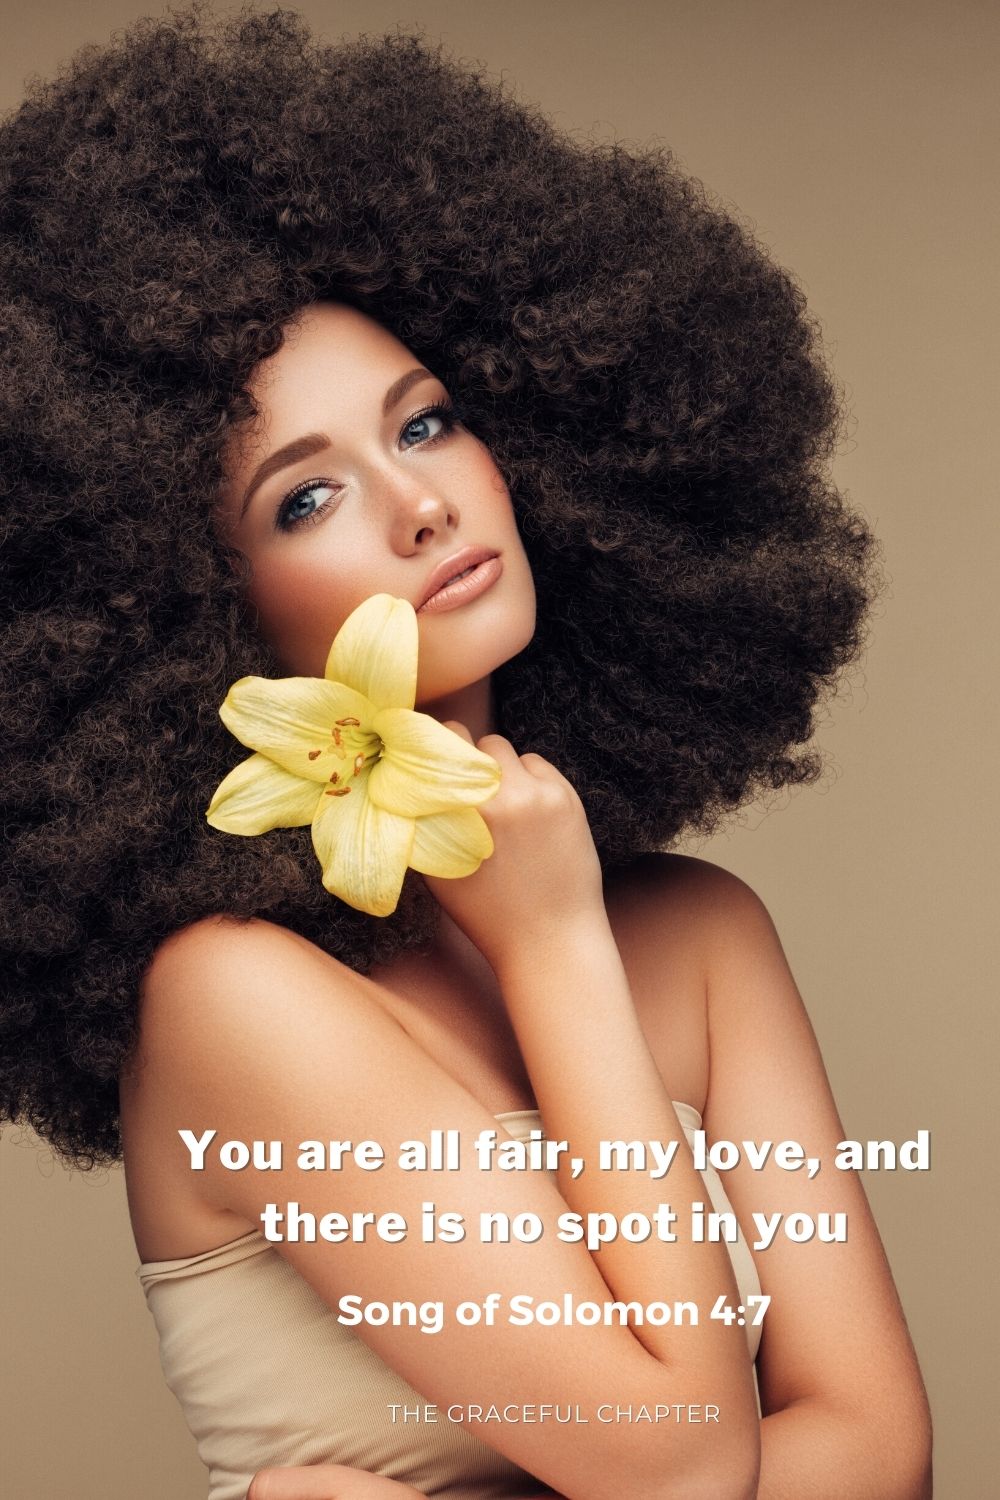 You are all fair, my love, And there is no spot in you Song of Solomon 4:7